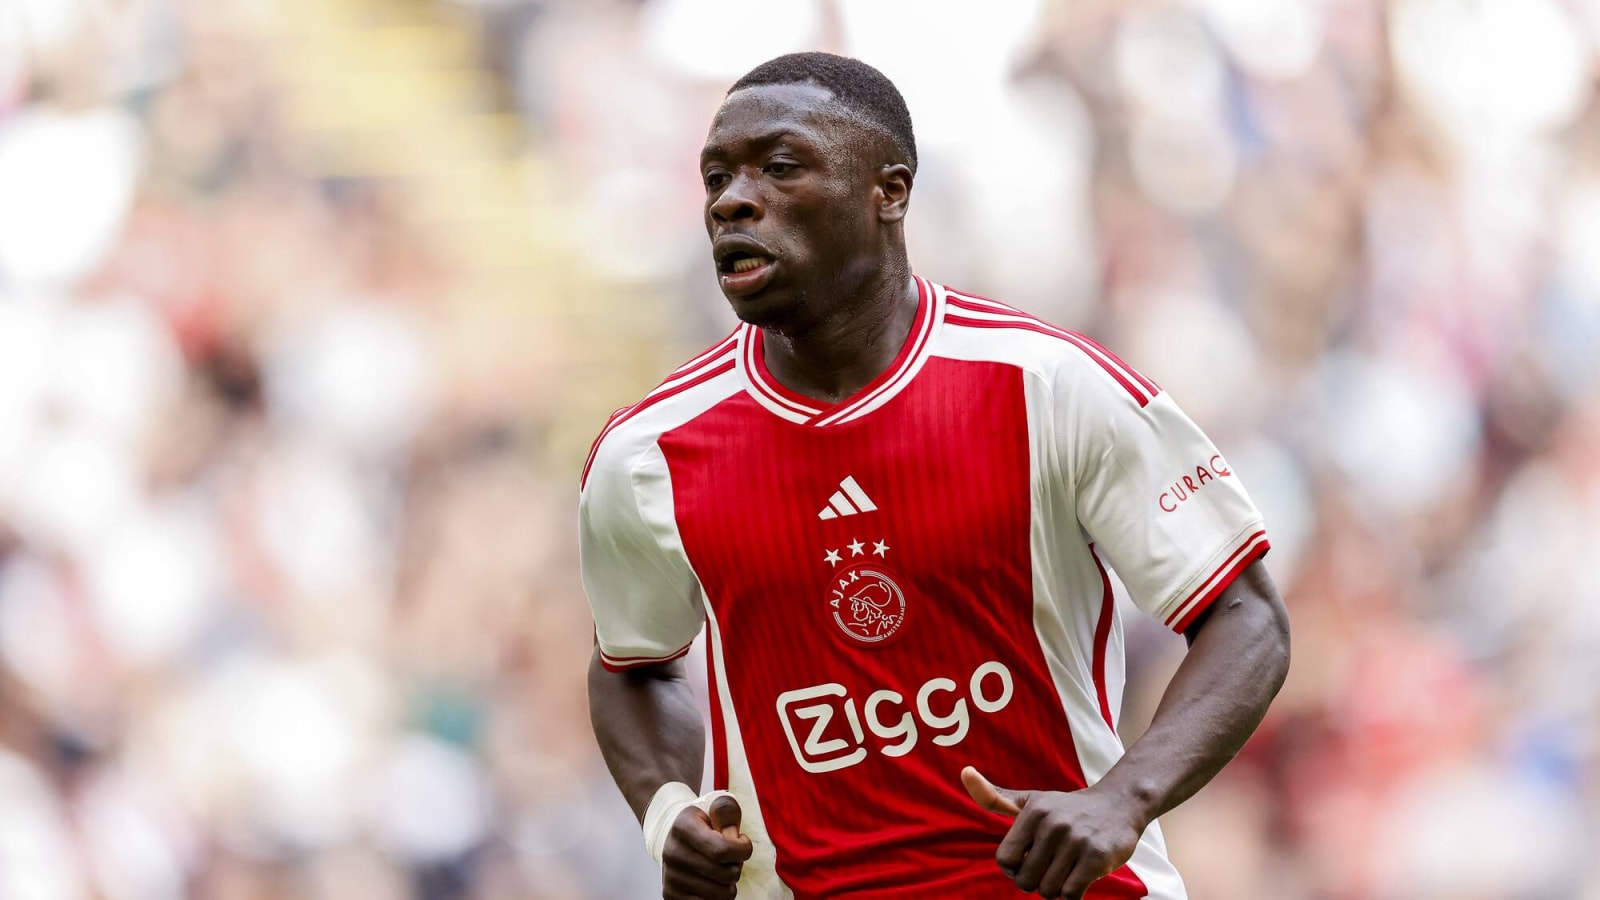 Ajax star names Arsenal as one of the clubs he wants to join